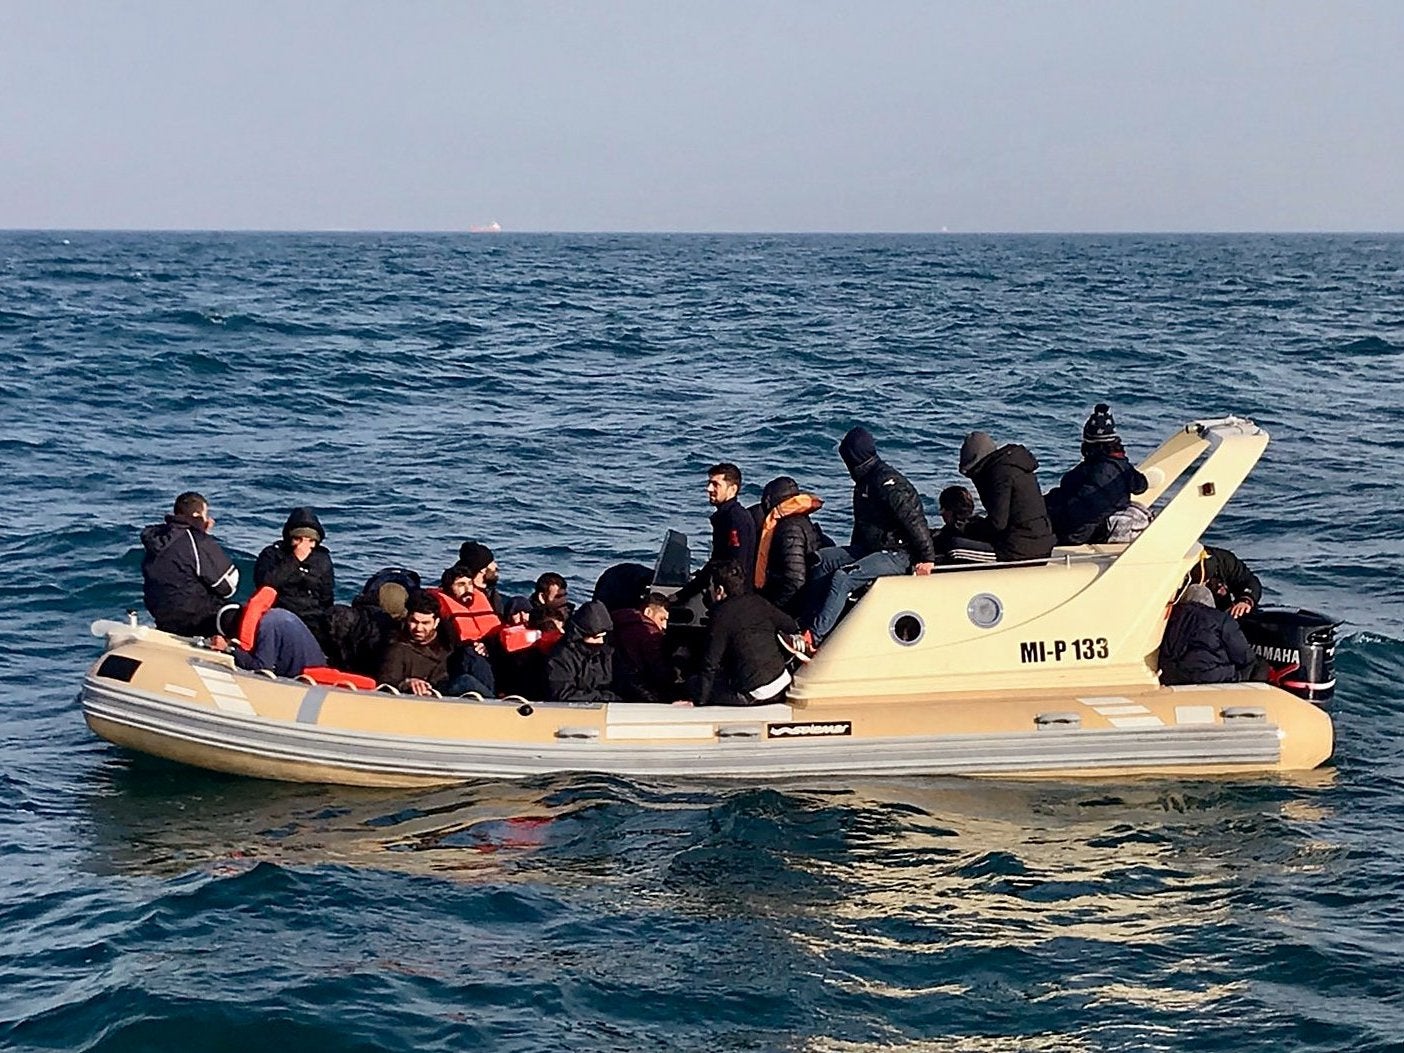 Rescuers help migrants on a semi-rigid boat trying make their way from France to the UK